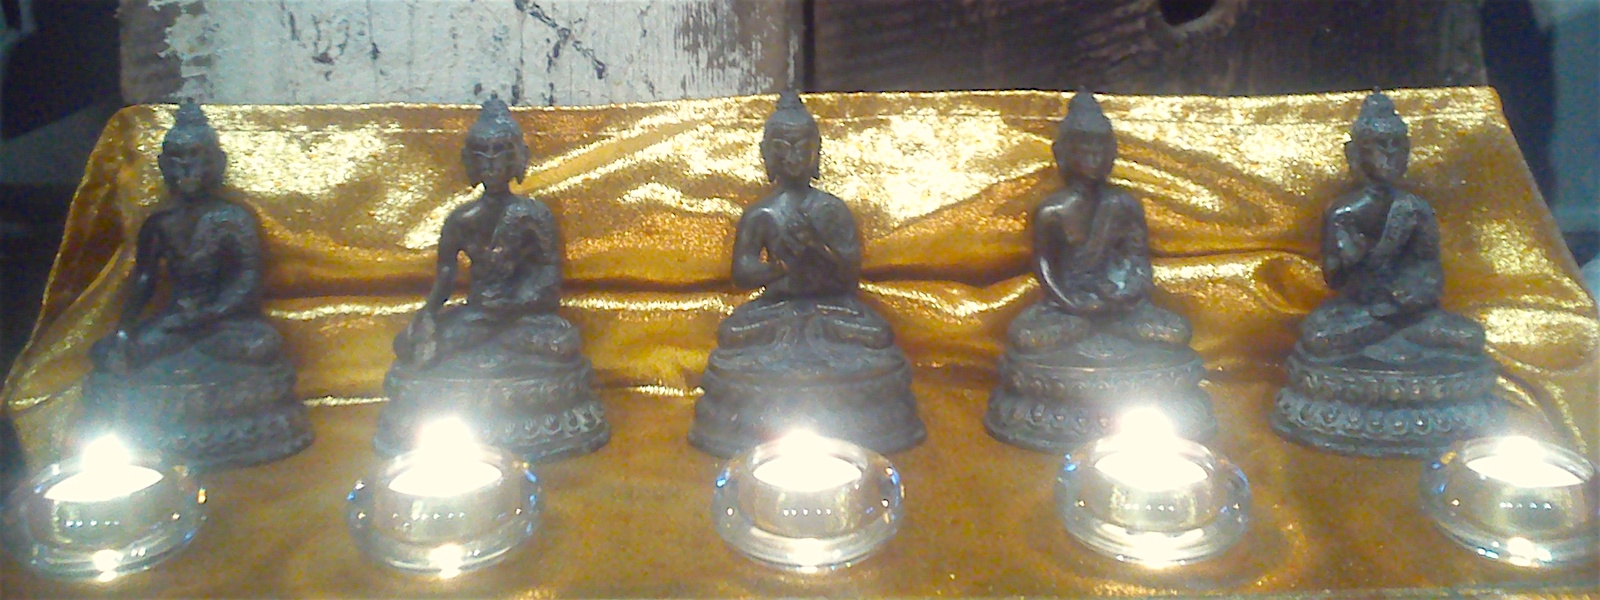 Row of Buddhas and candles